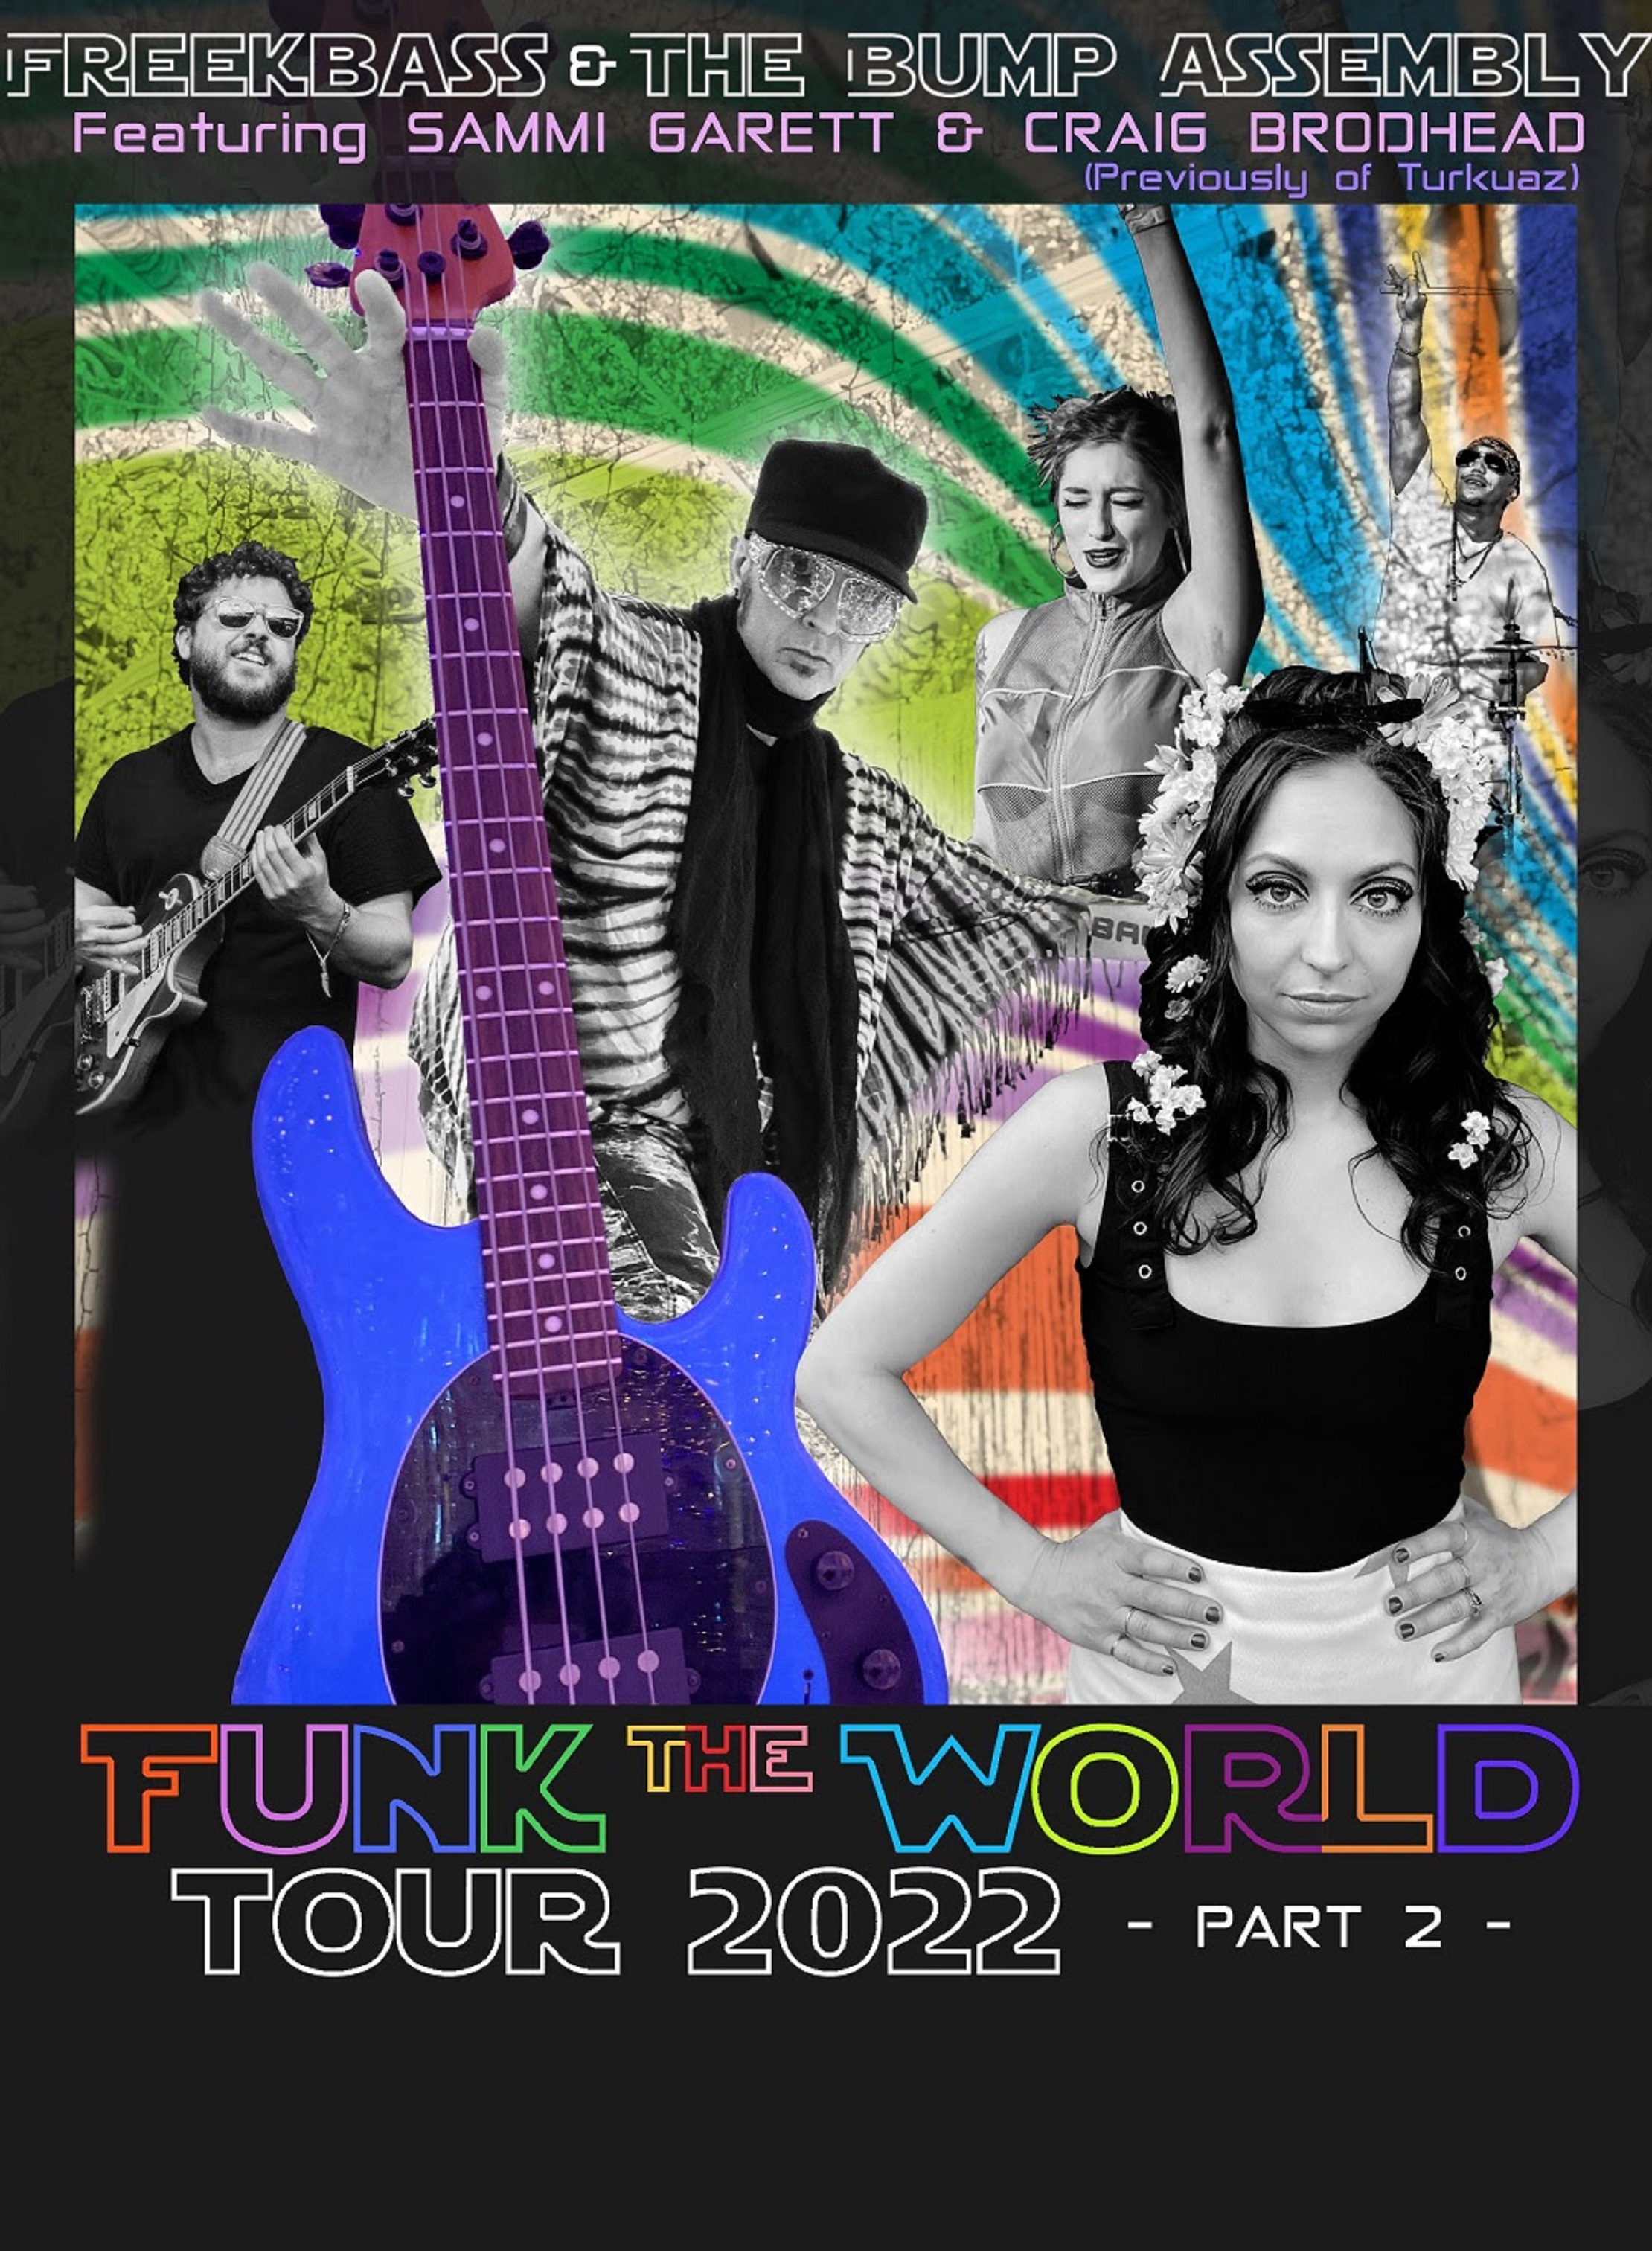 Freekbass & The Bump Assembly Announce 2022 Funk The World Tour